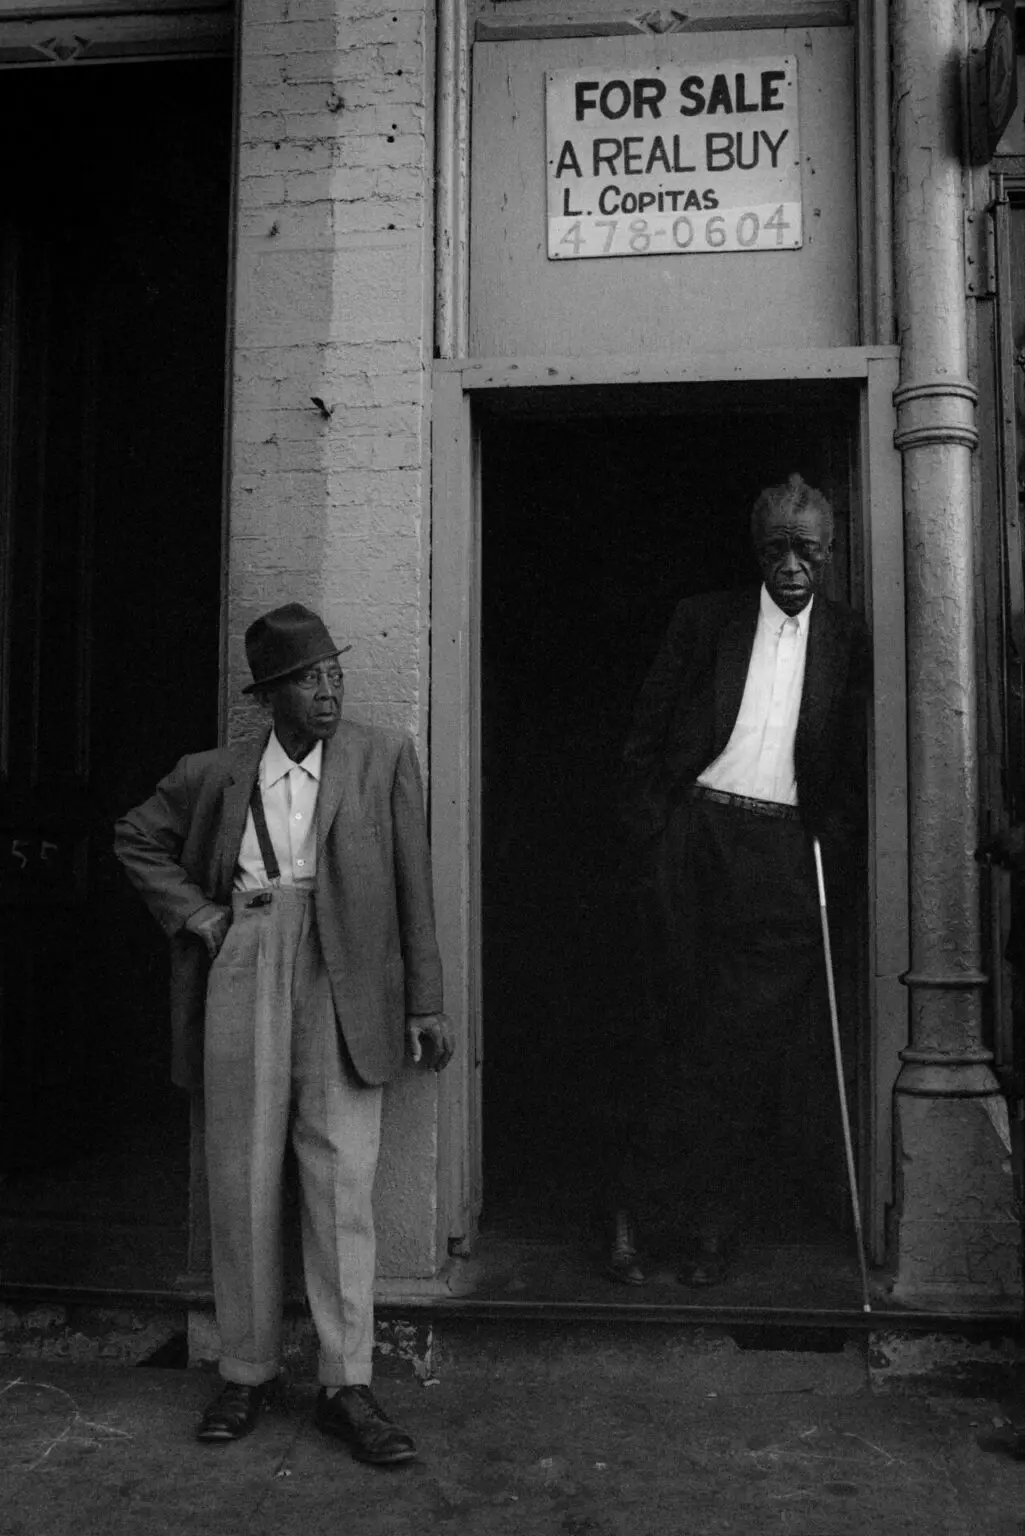 In my early photography days, I captured a unique moment on the west side of Chicago. Two men, one with a coat pulled back and the other blind, stood beneath a 'for sale' sign. It told a compelling story.